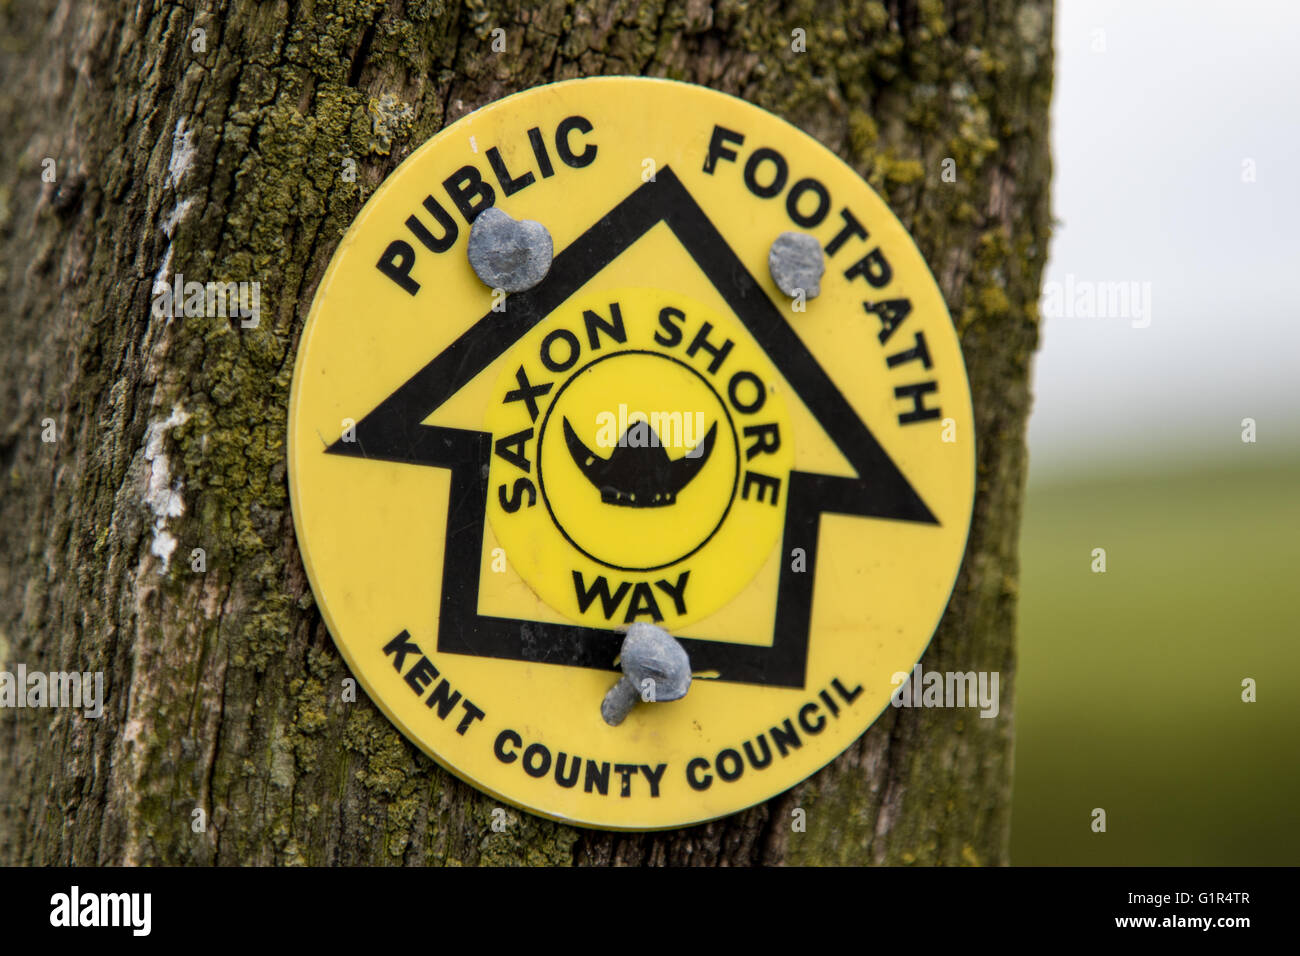 Yellow Saxon Shore Way footpath sign on a wooden post Stock Photo